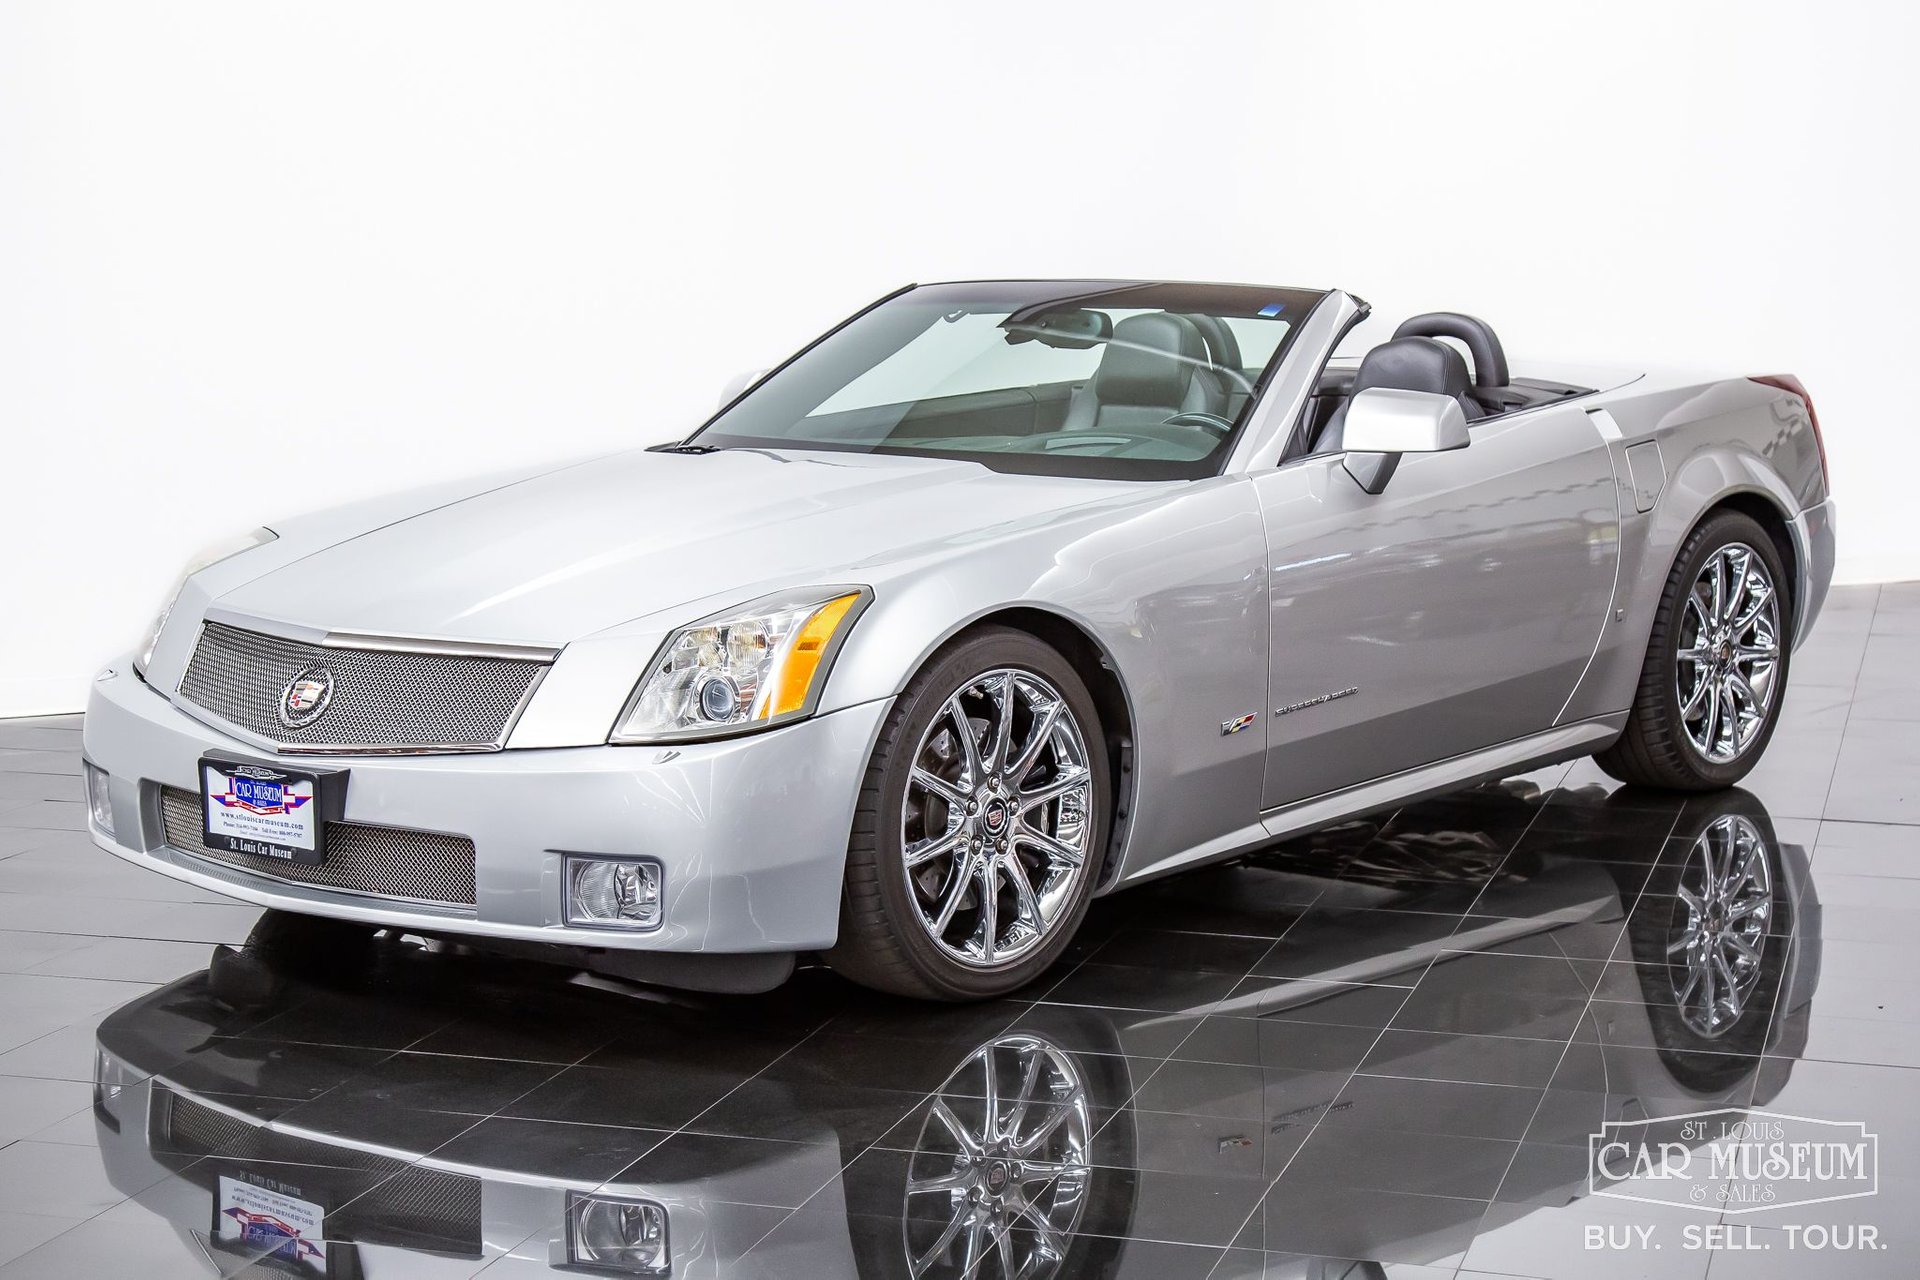 2006 Cadillac XLR-V Roadster For Sale | St. Louis Car Museum